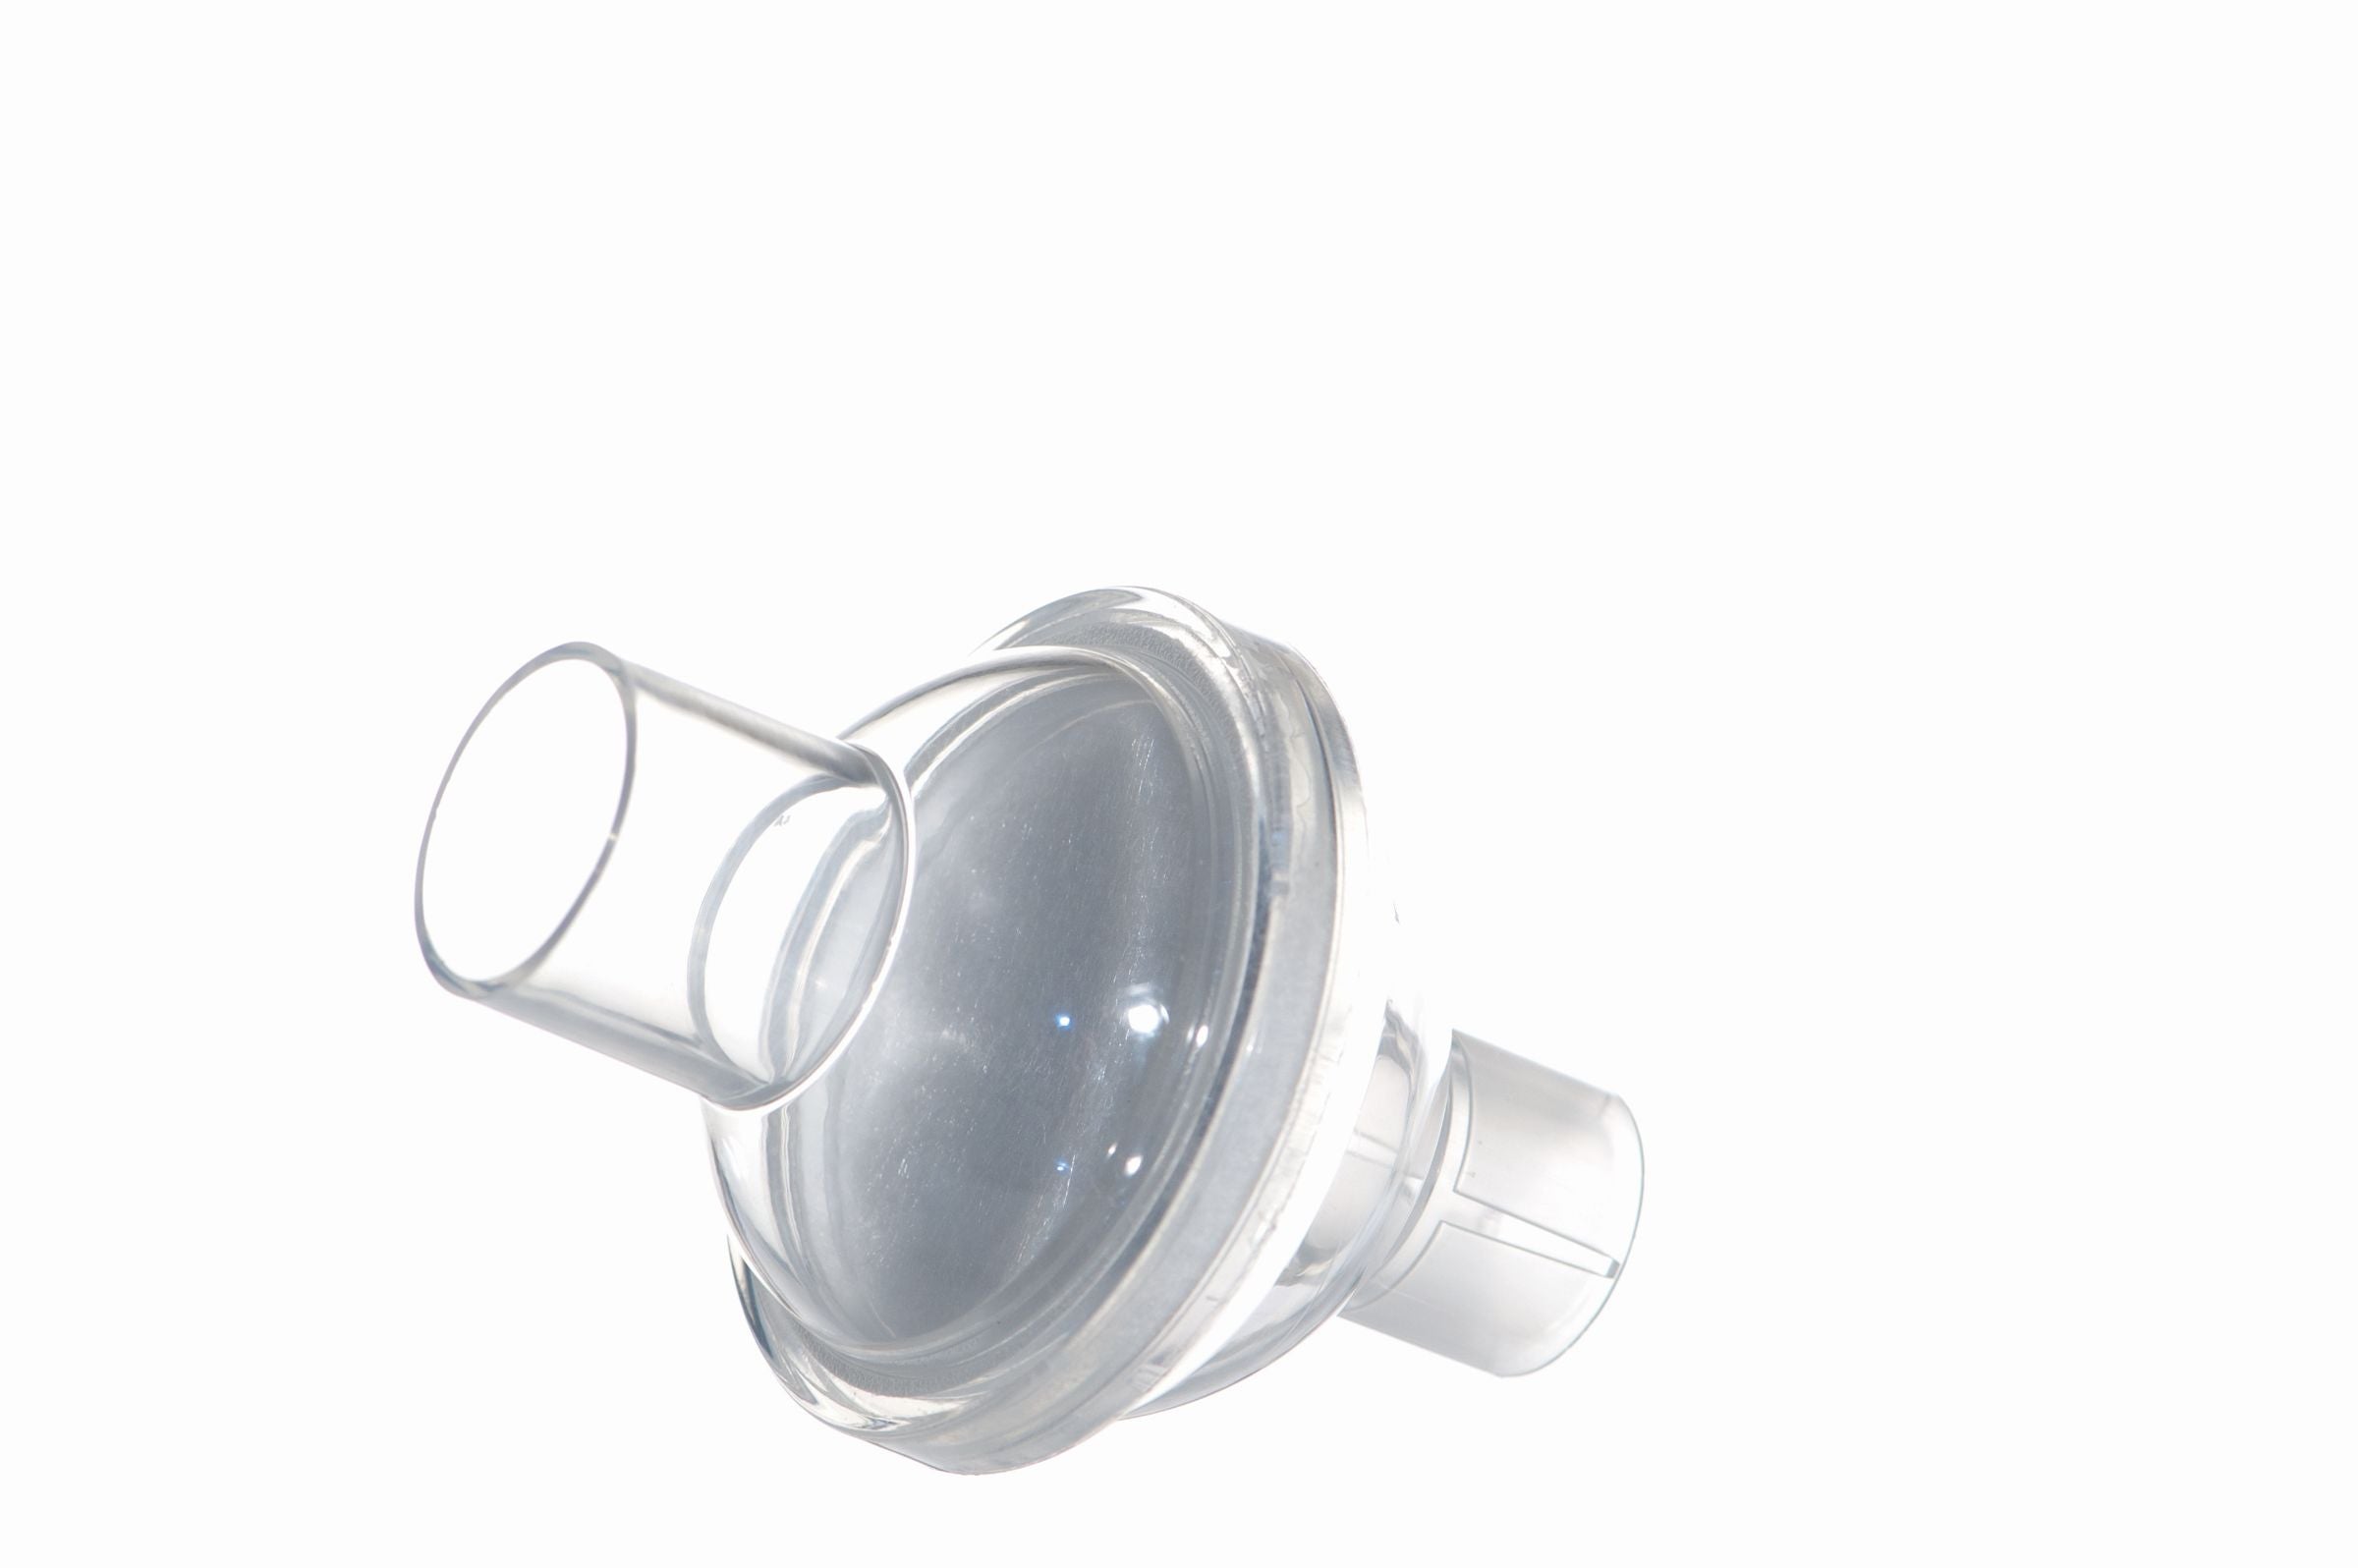 Disposable Bacteria Filter for CPAP/BiPAP/Ventilator Machines - Active Lifestyle Store